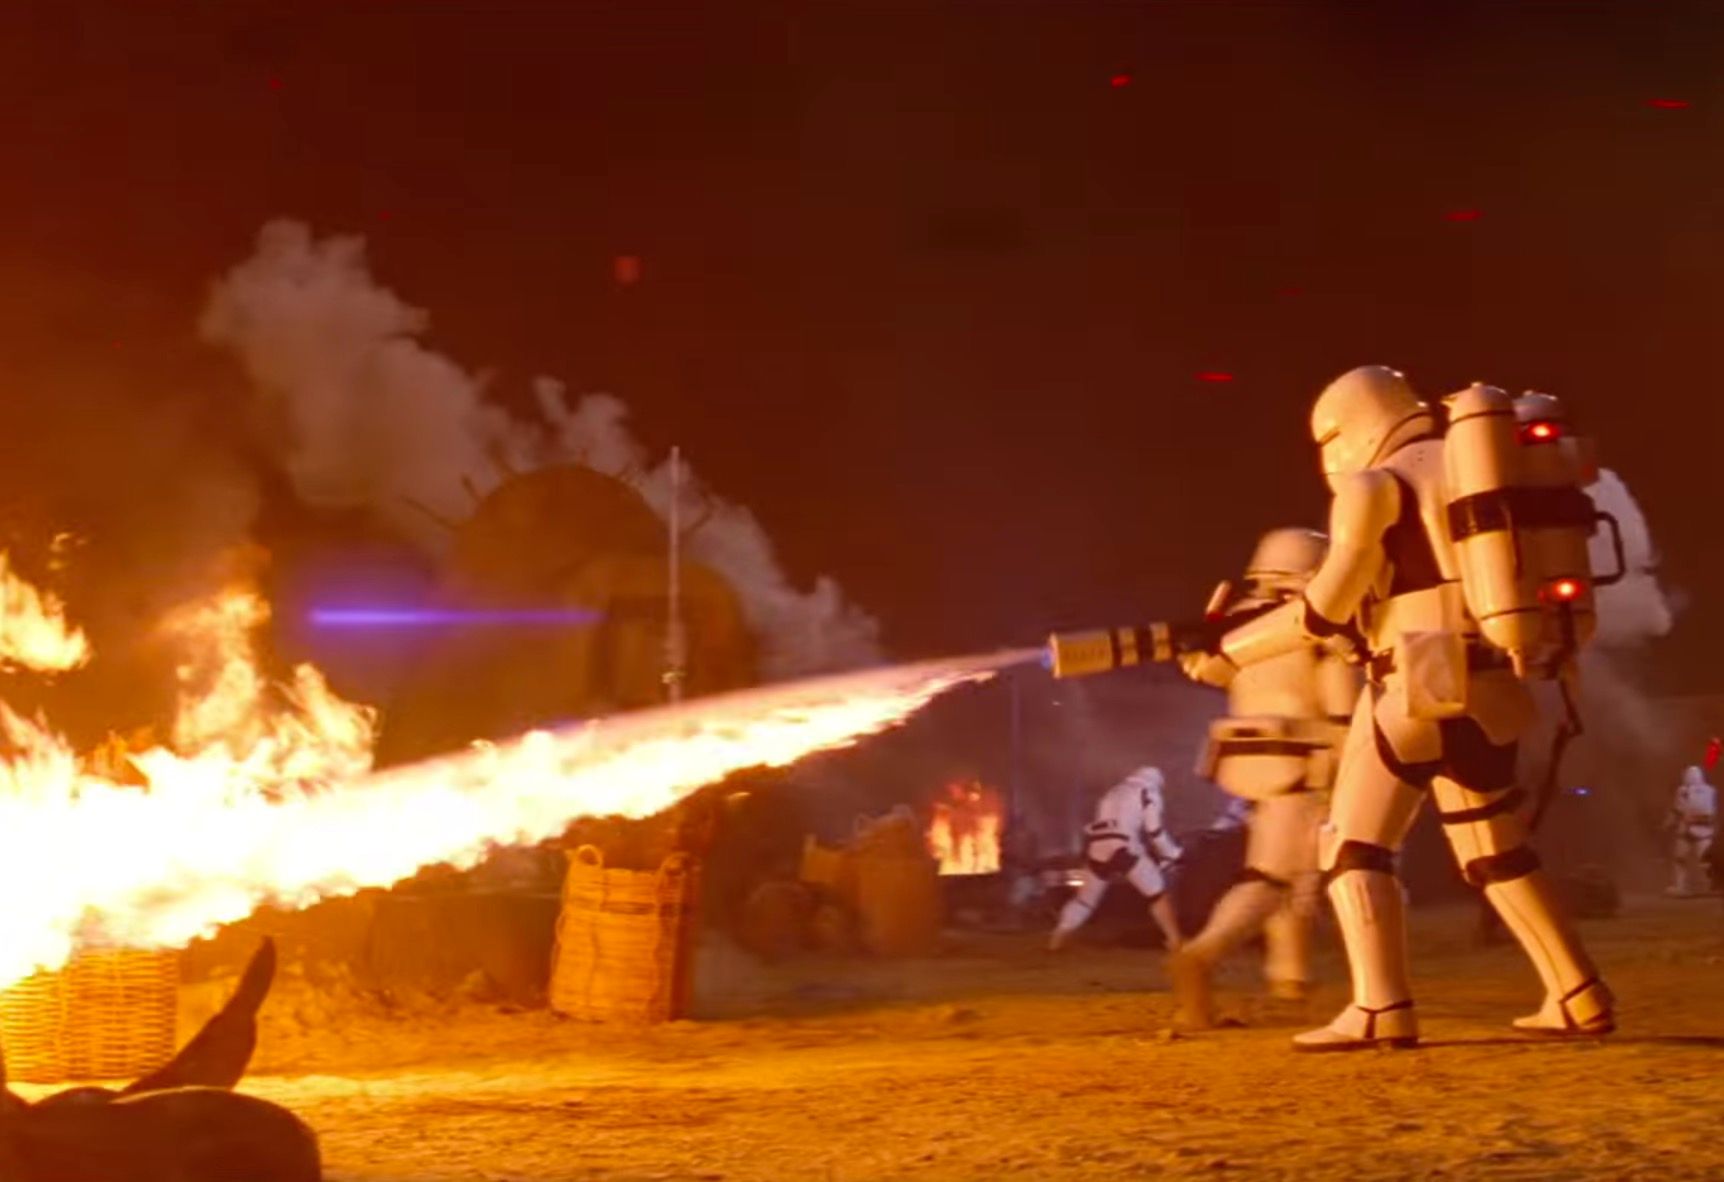 international star wars episode vii trailer is out and packed with new footage image 1